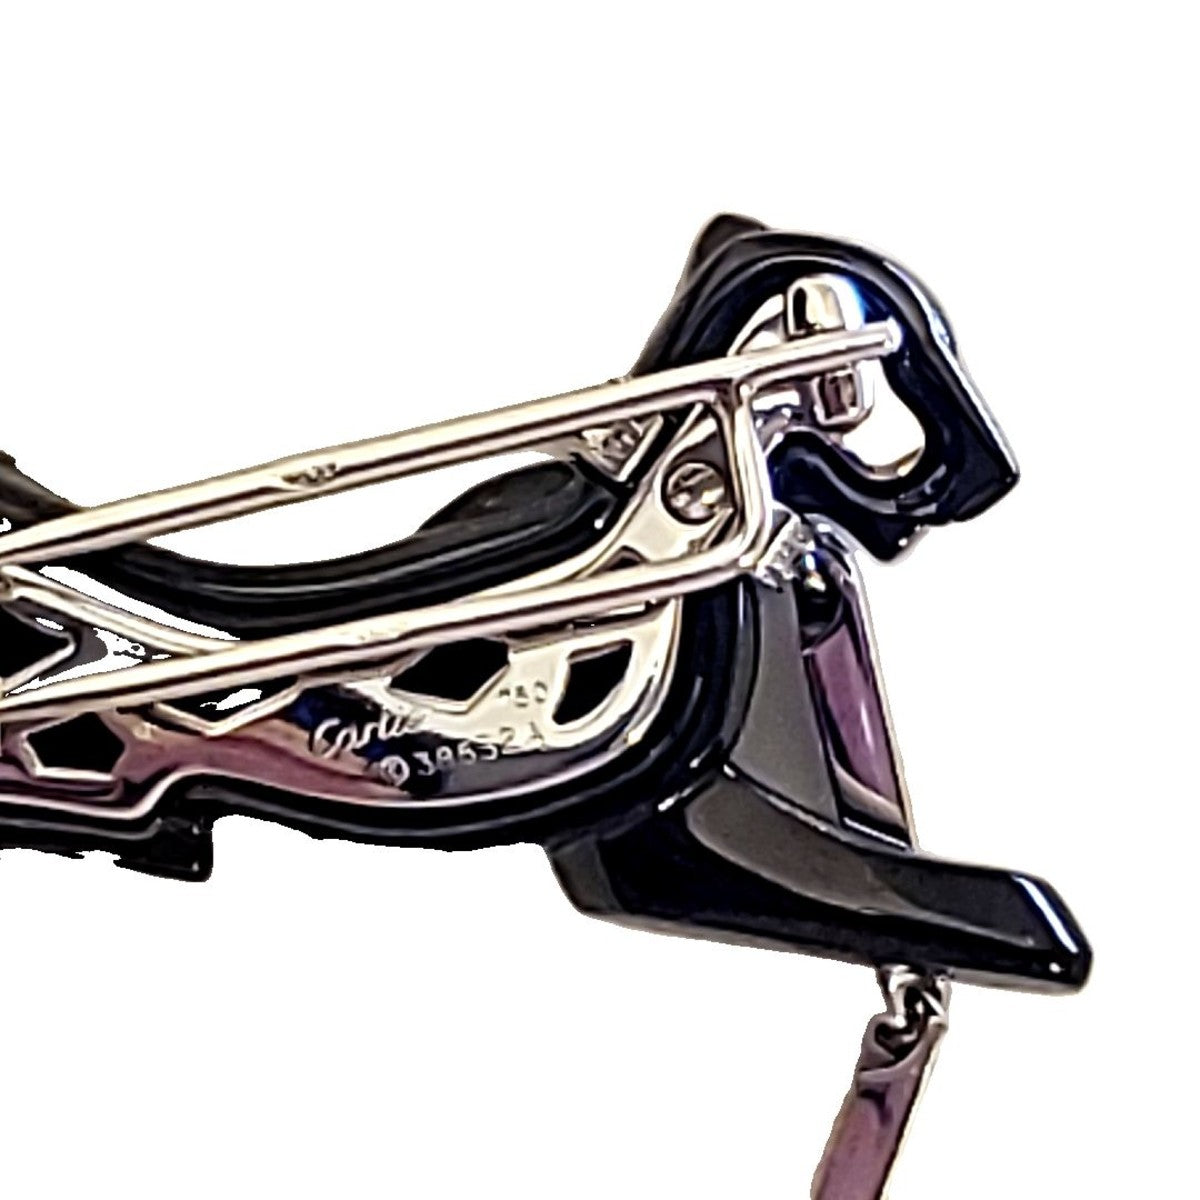 Cartier Paris 18KT White Gold Onyx & Emerald Panther Brooch close-up of signature